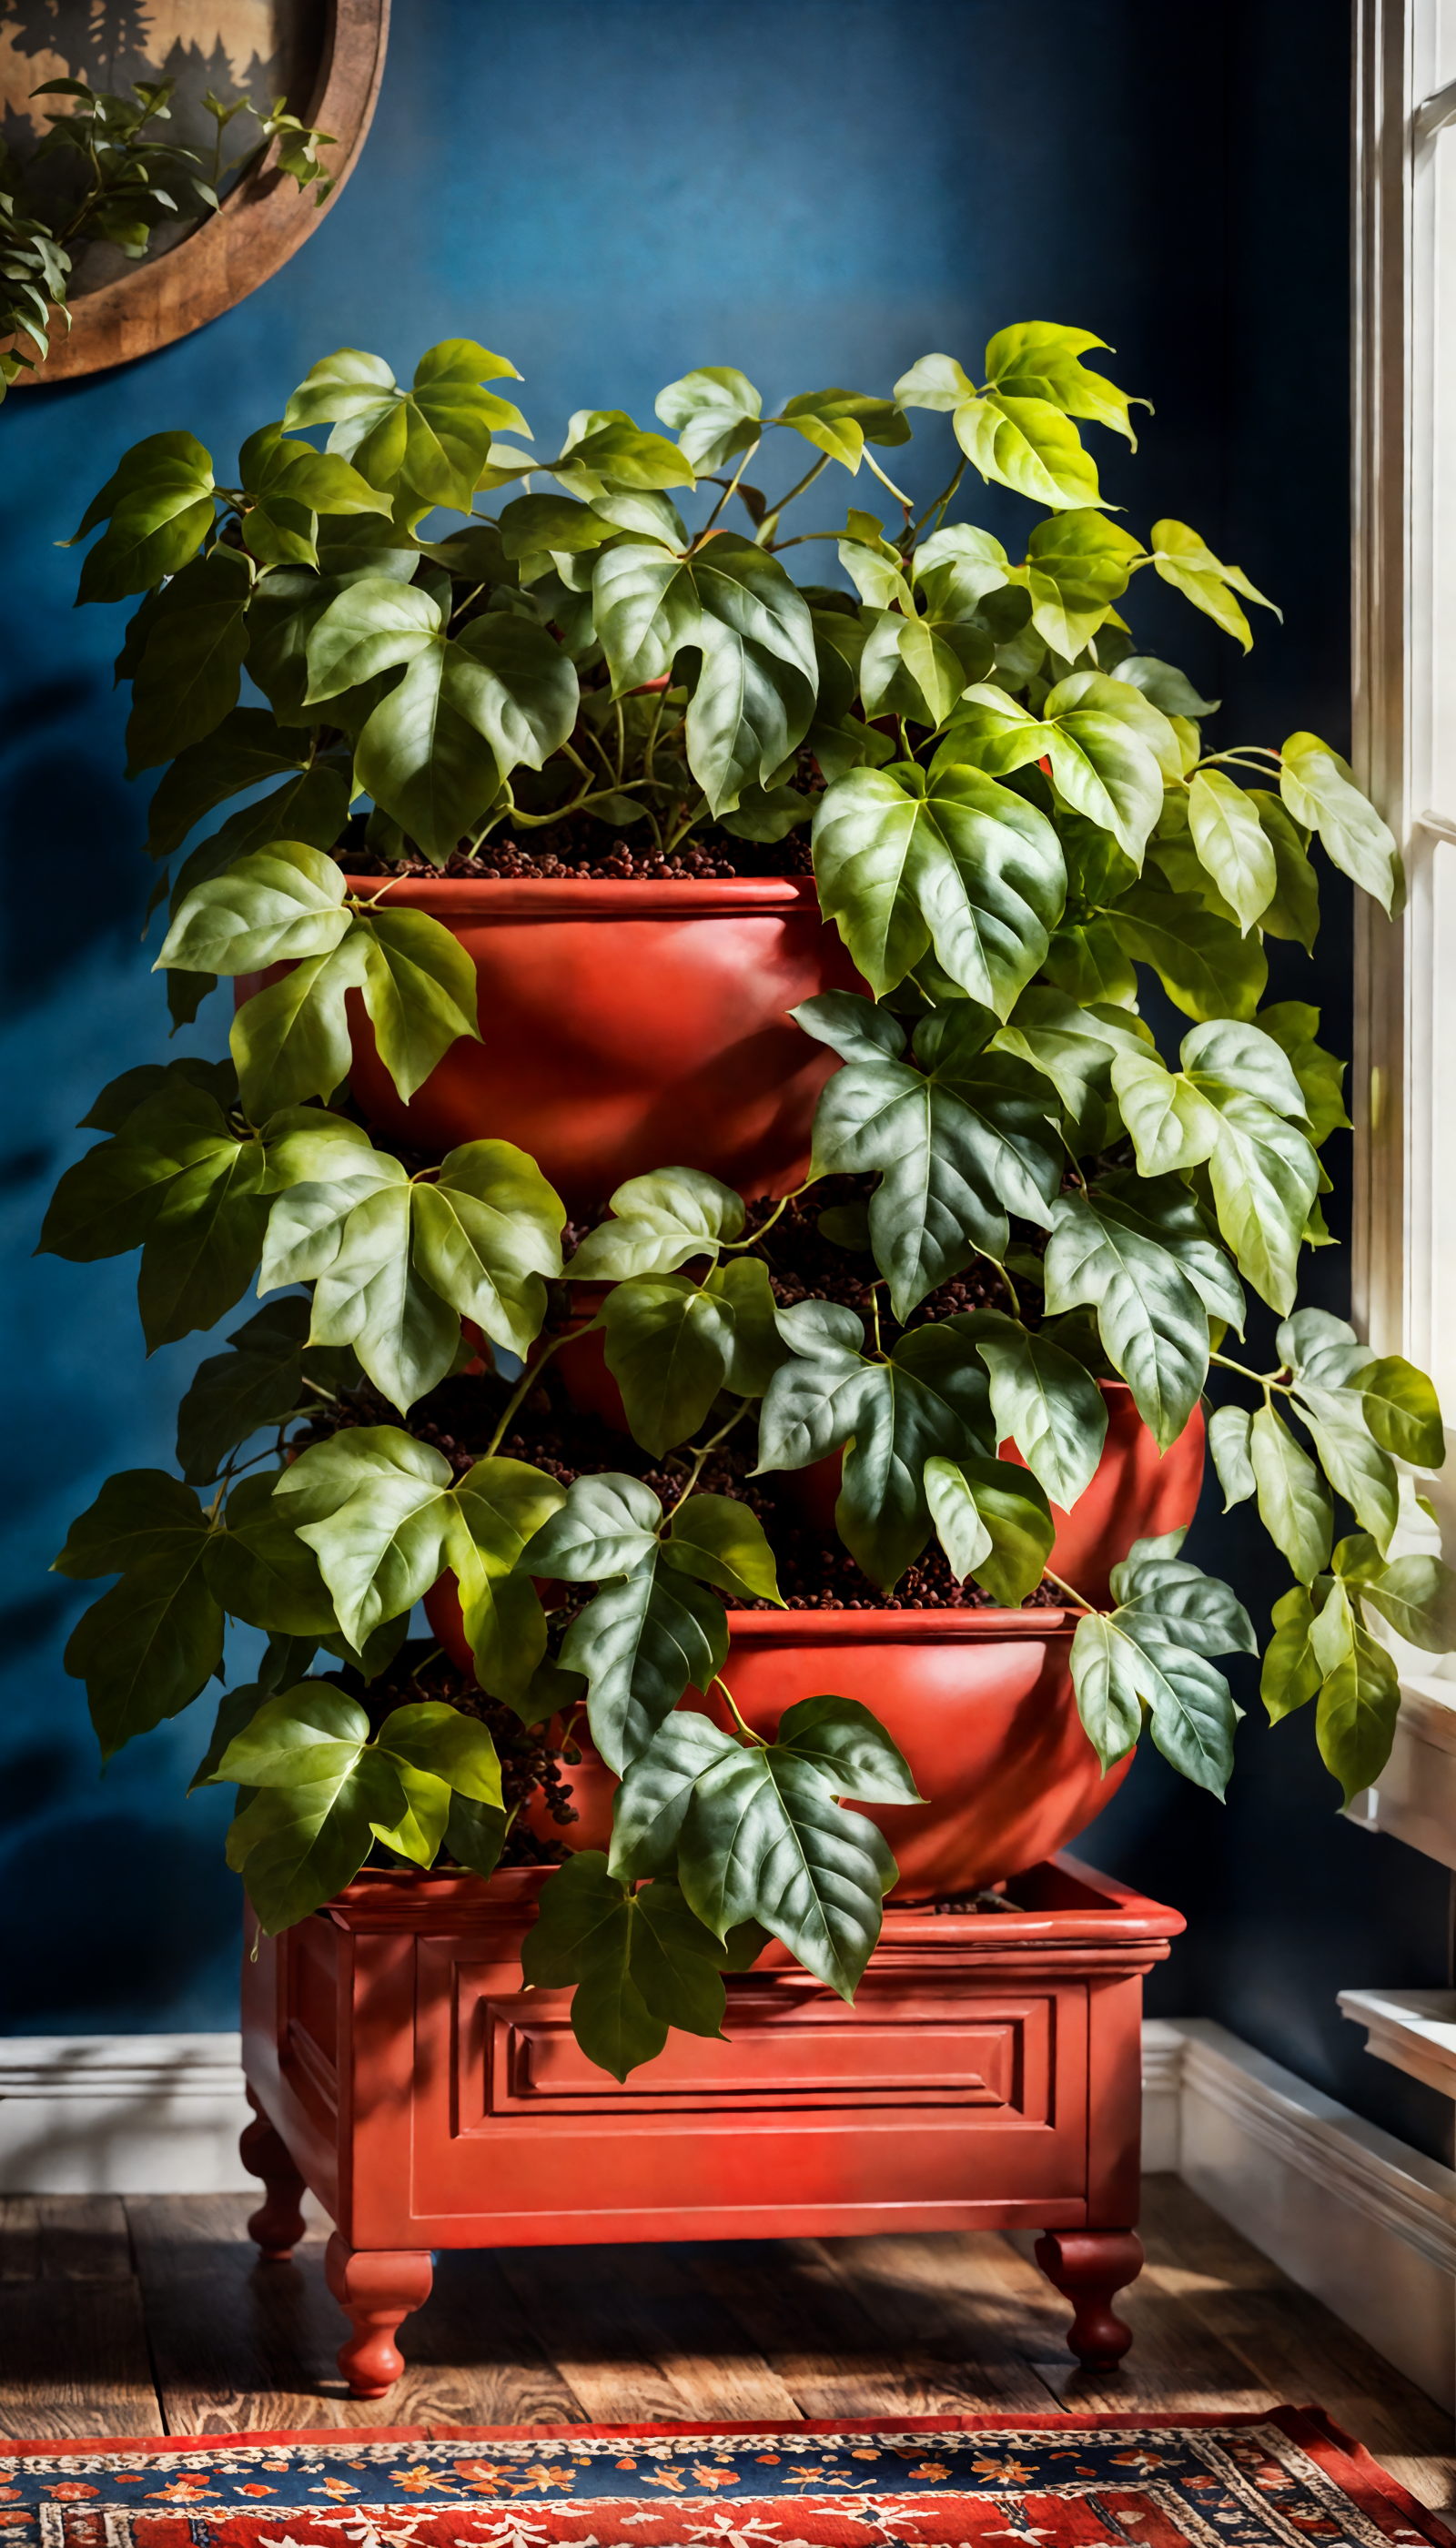 Cissus alata plant in a planter beside a red chair, near a window with clear lighting.